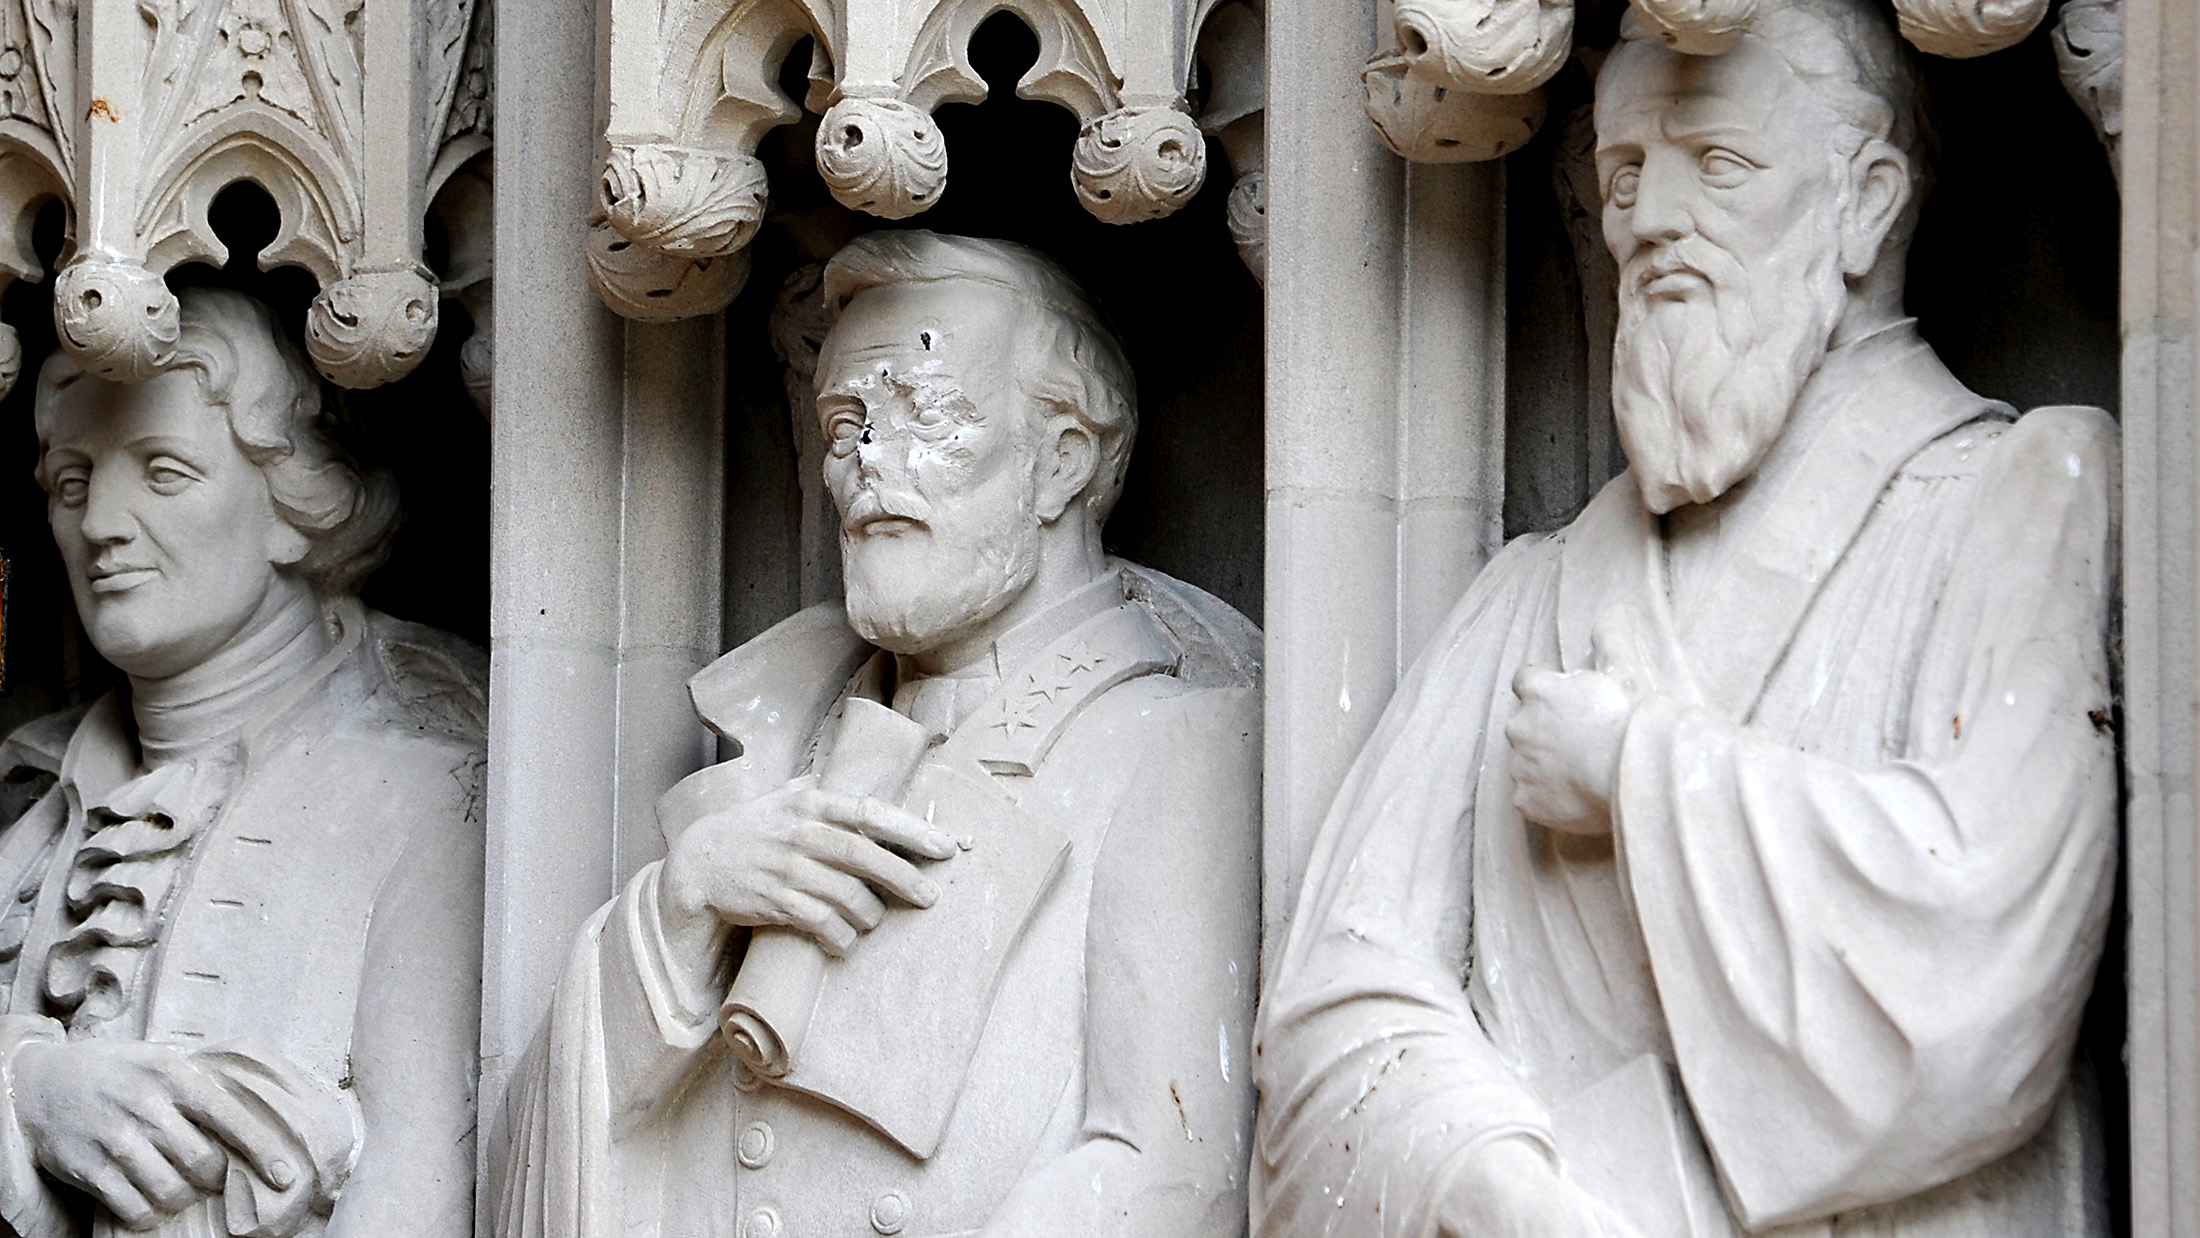 DURHAM, NC - AUGUST 17: A statue on the portal of Duke University Chapel bearing the likeness of Confederate General Robert E. Lee was vandalized on early August 17, 2017 in Durham, North Carolina. The statue is one of 10 historical figures adorning the exterior of the chapel; the group includes significant figures from the American South and the Protestant and Methodist traditions.
